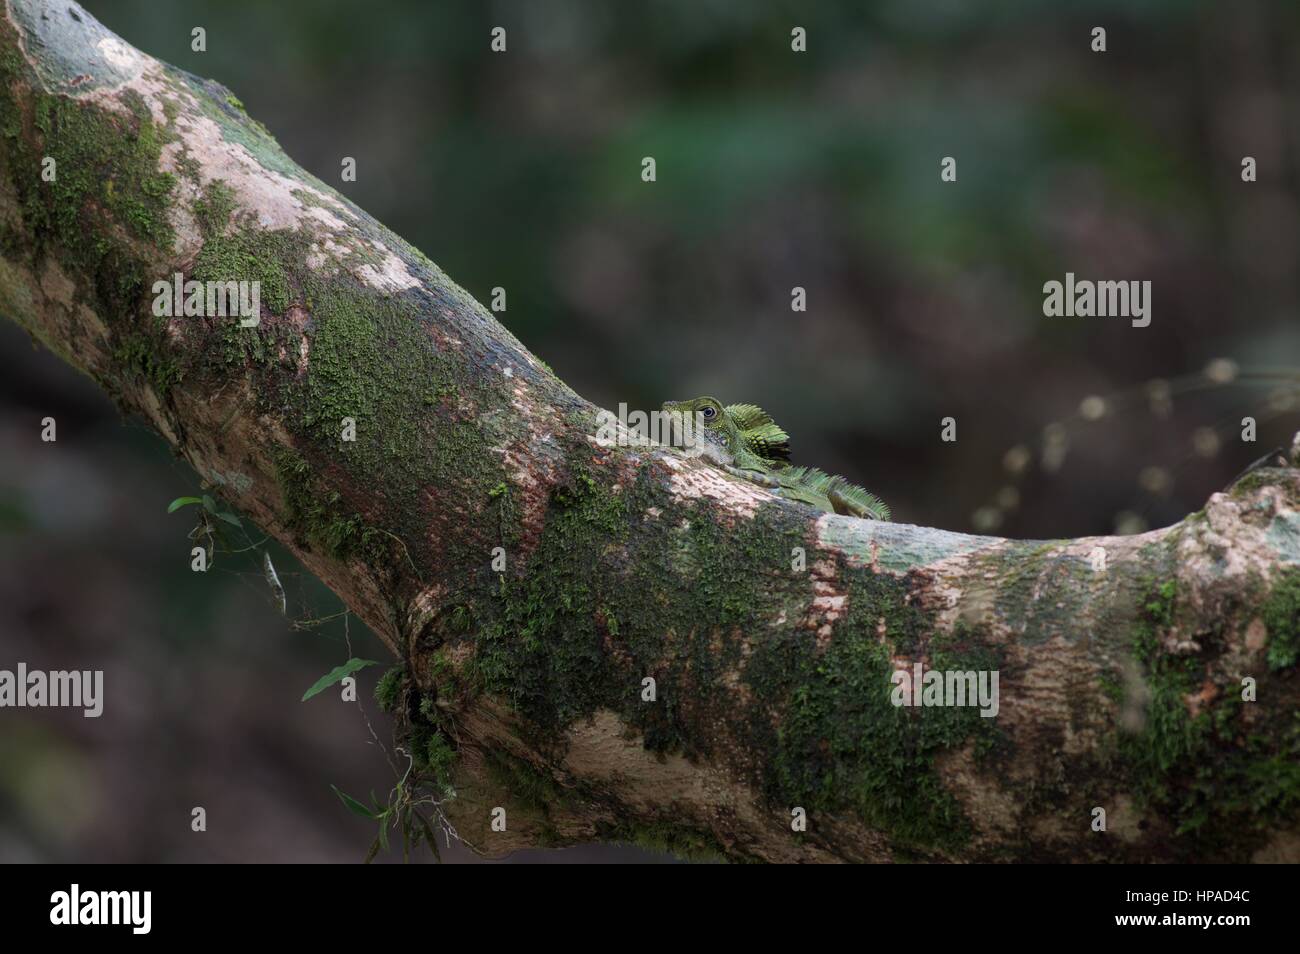 An adult male Great Anglehead Lizard (Gonocephalus grandis) on a tree in the Malaysian rainforest Stock Photo